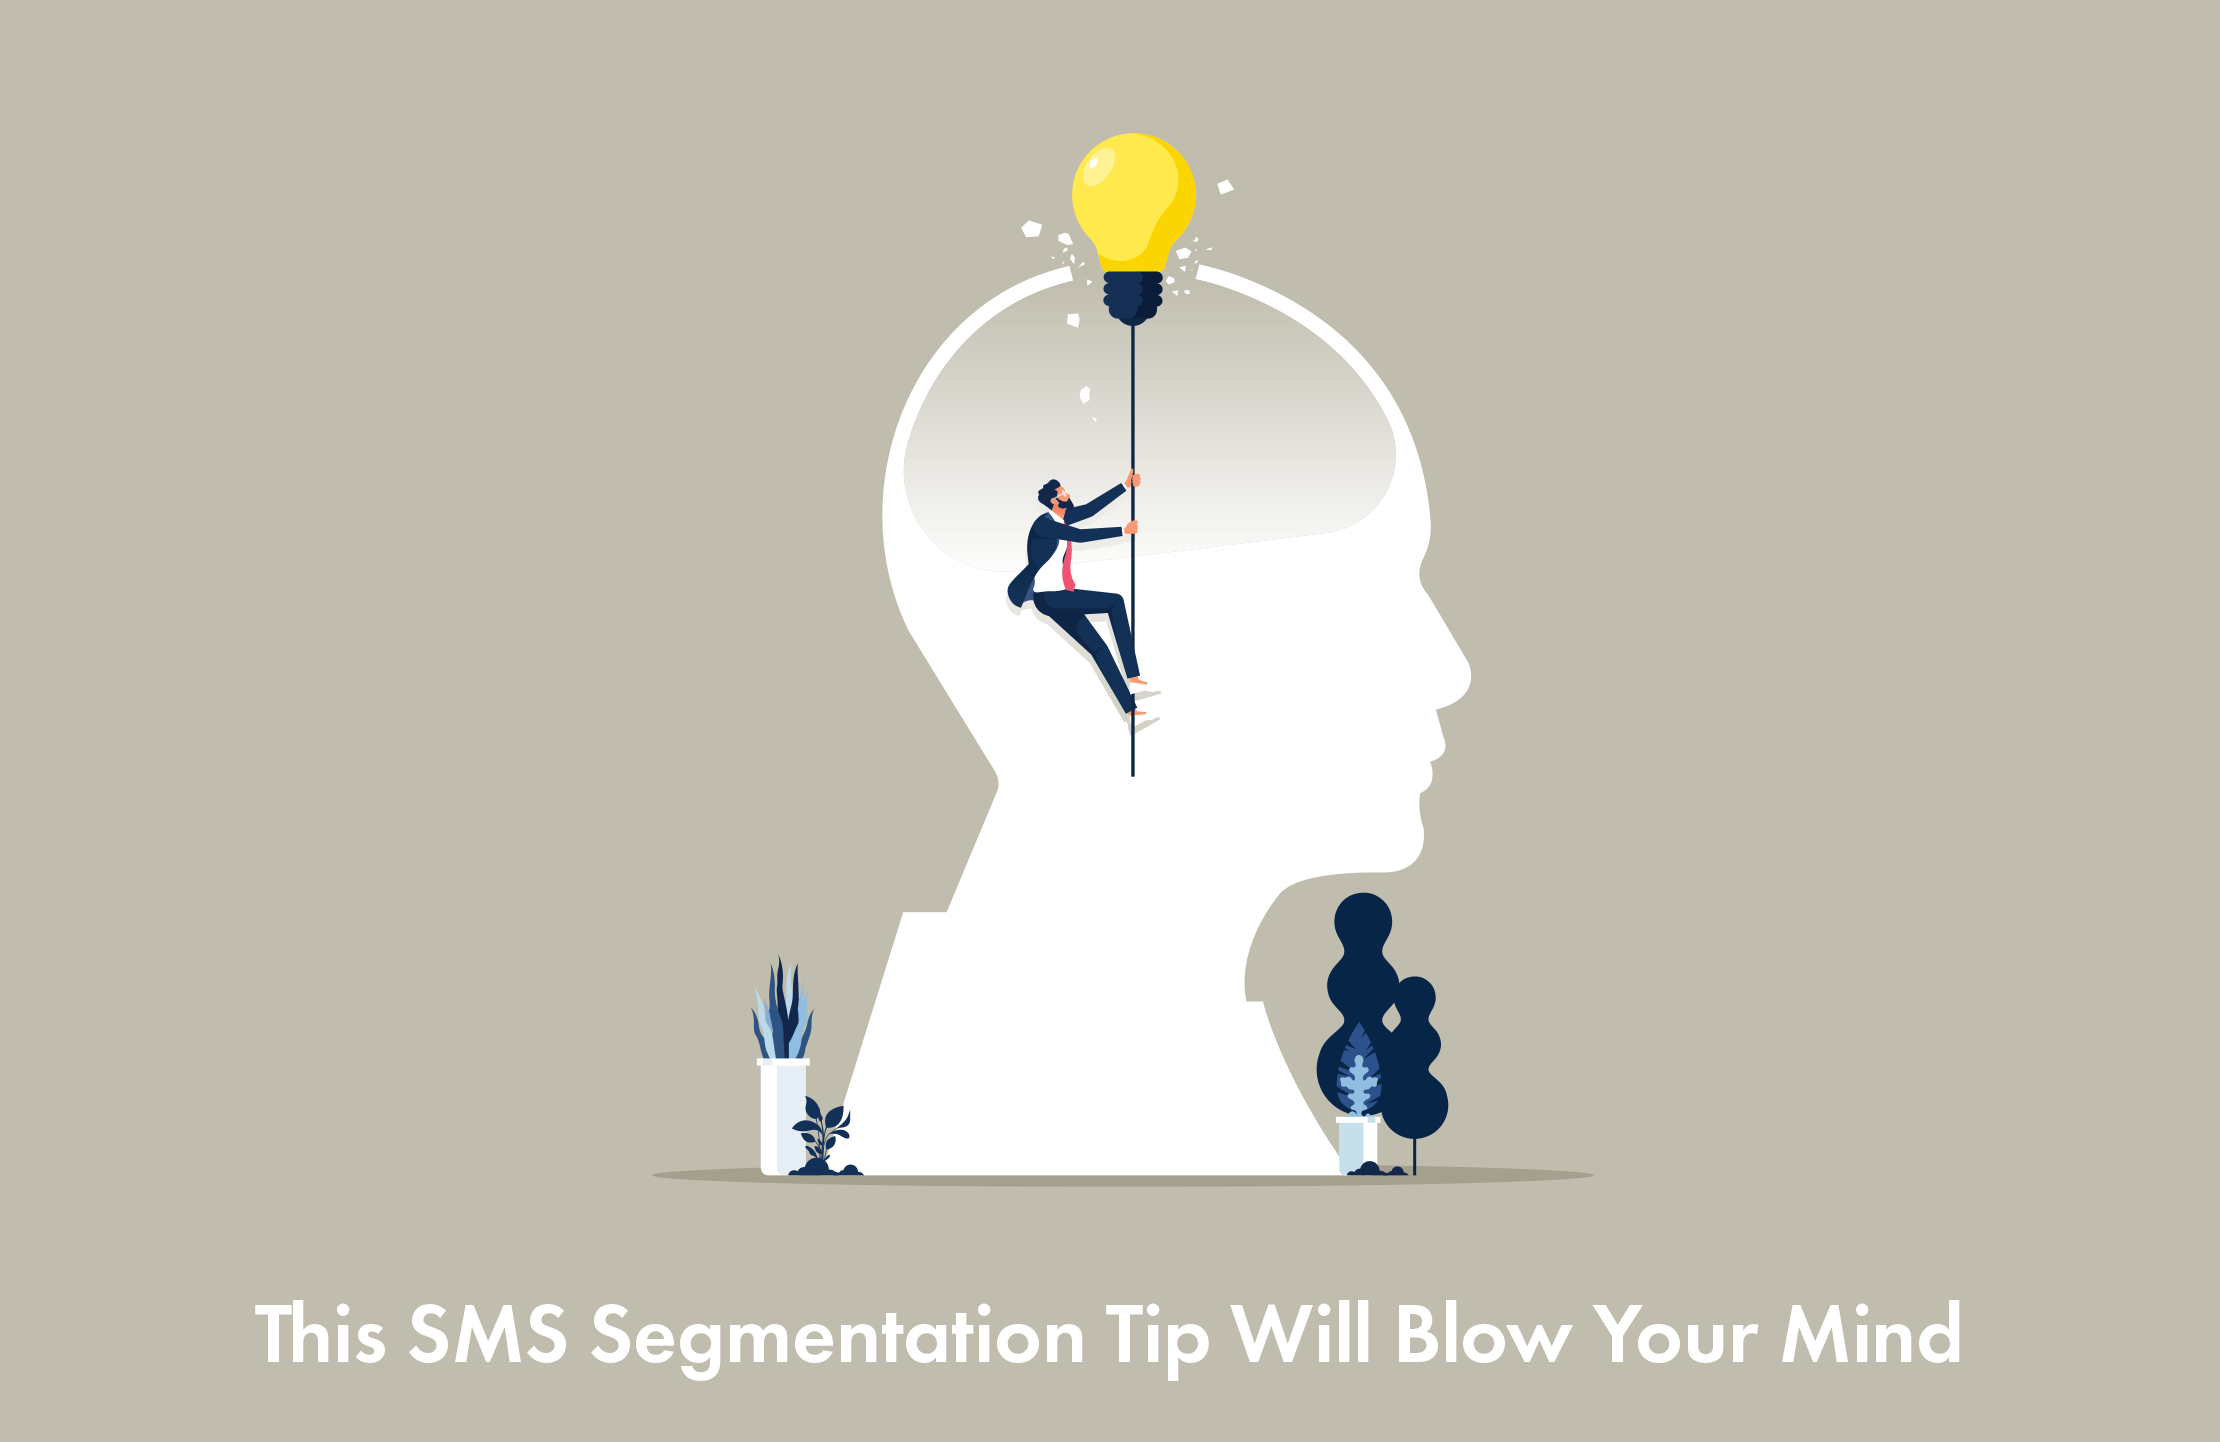 This SMS Segmentation Tip Will Blow Your Mind